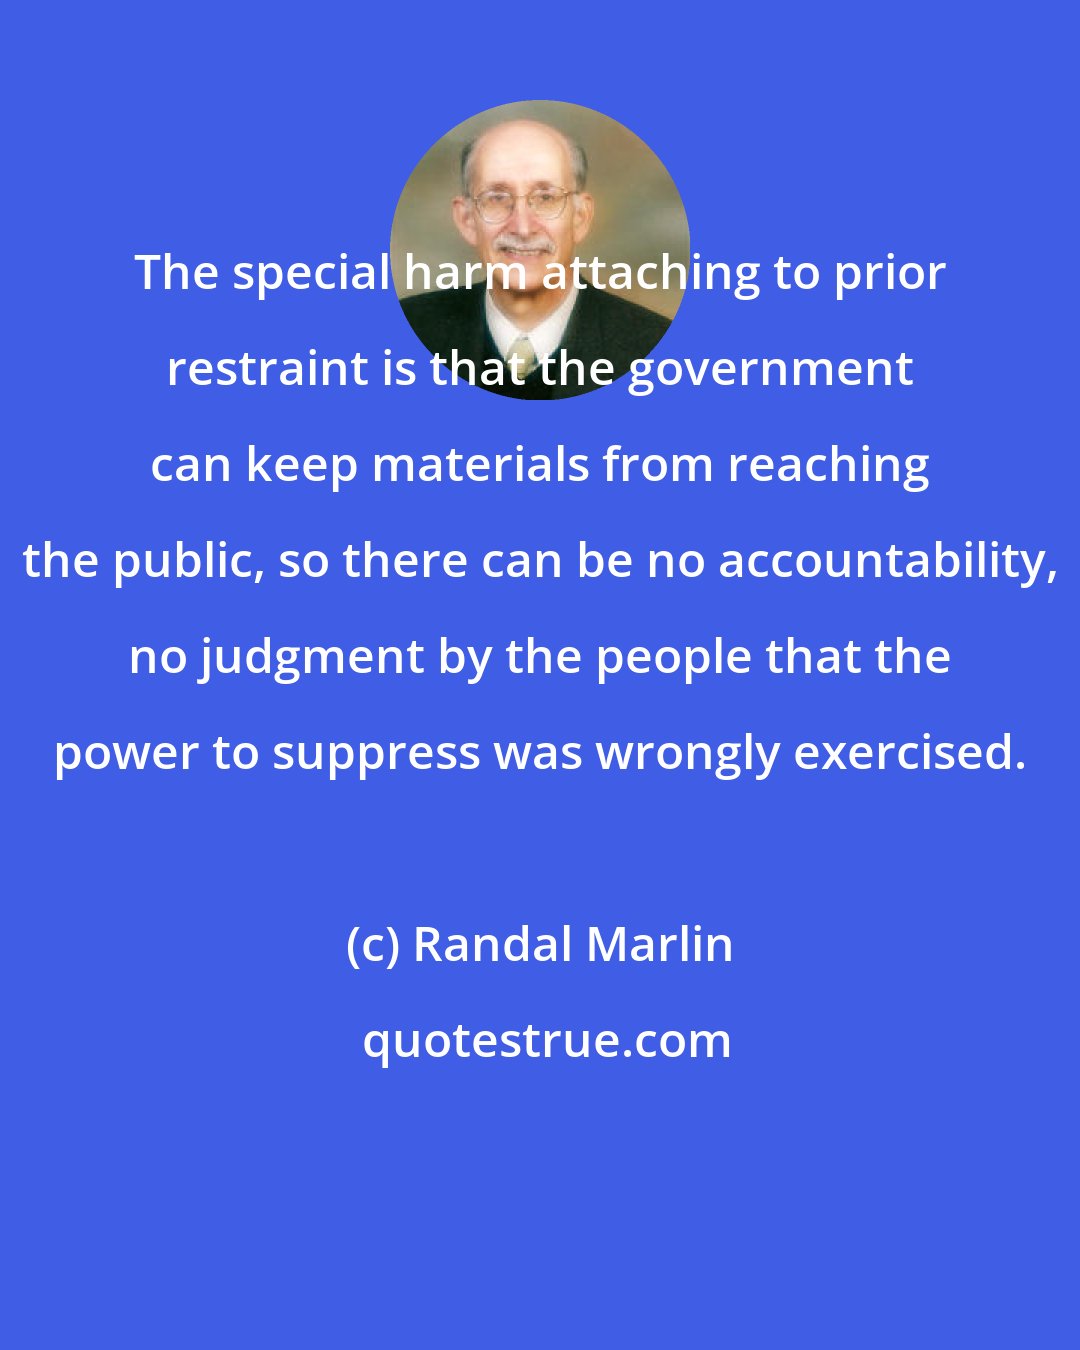 Randal Marlin: The special harm attaching to prior restraint is that the government can keep materials from reaching the public, so there can be no accountability, no judgment by the people that the power to suppress was wrongly exercised.